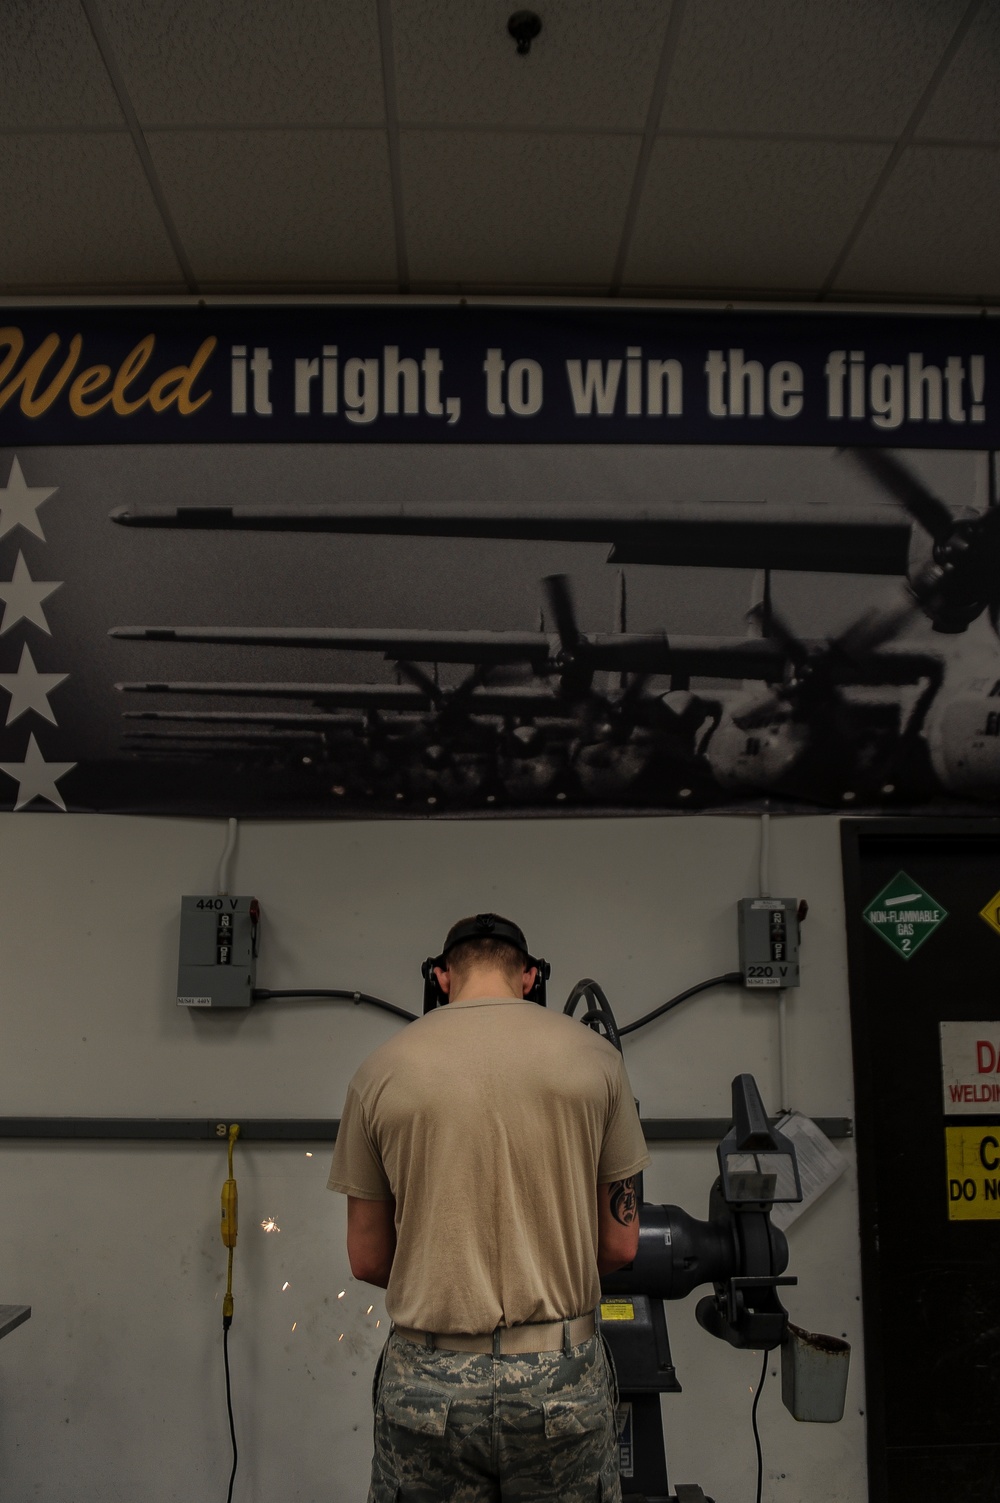 Weld it right to win the fight